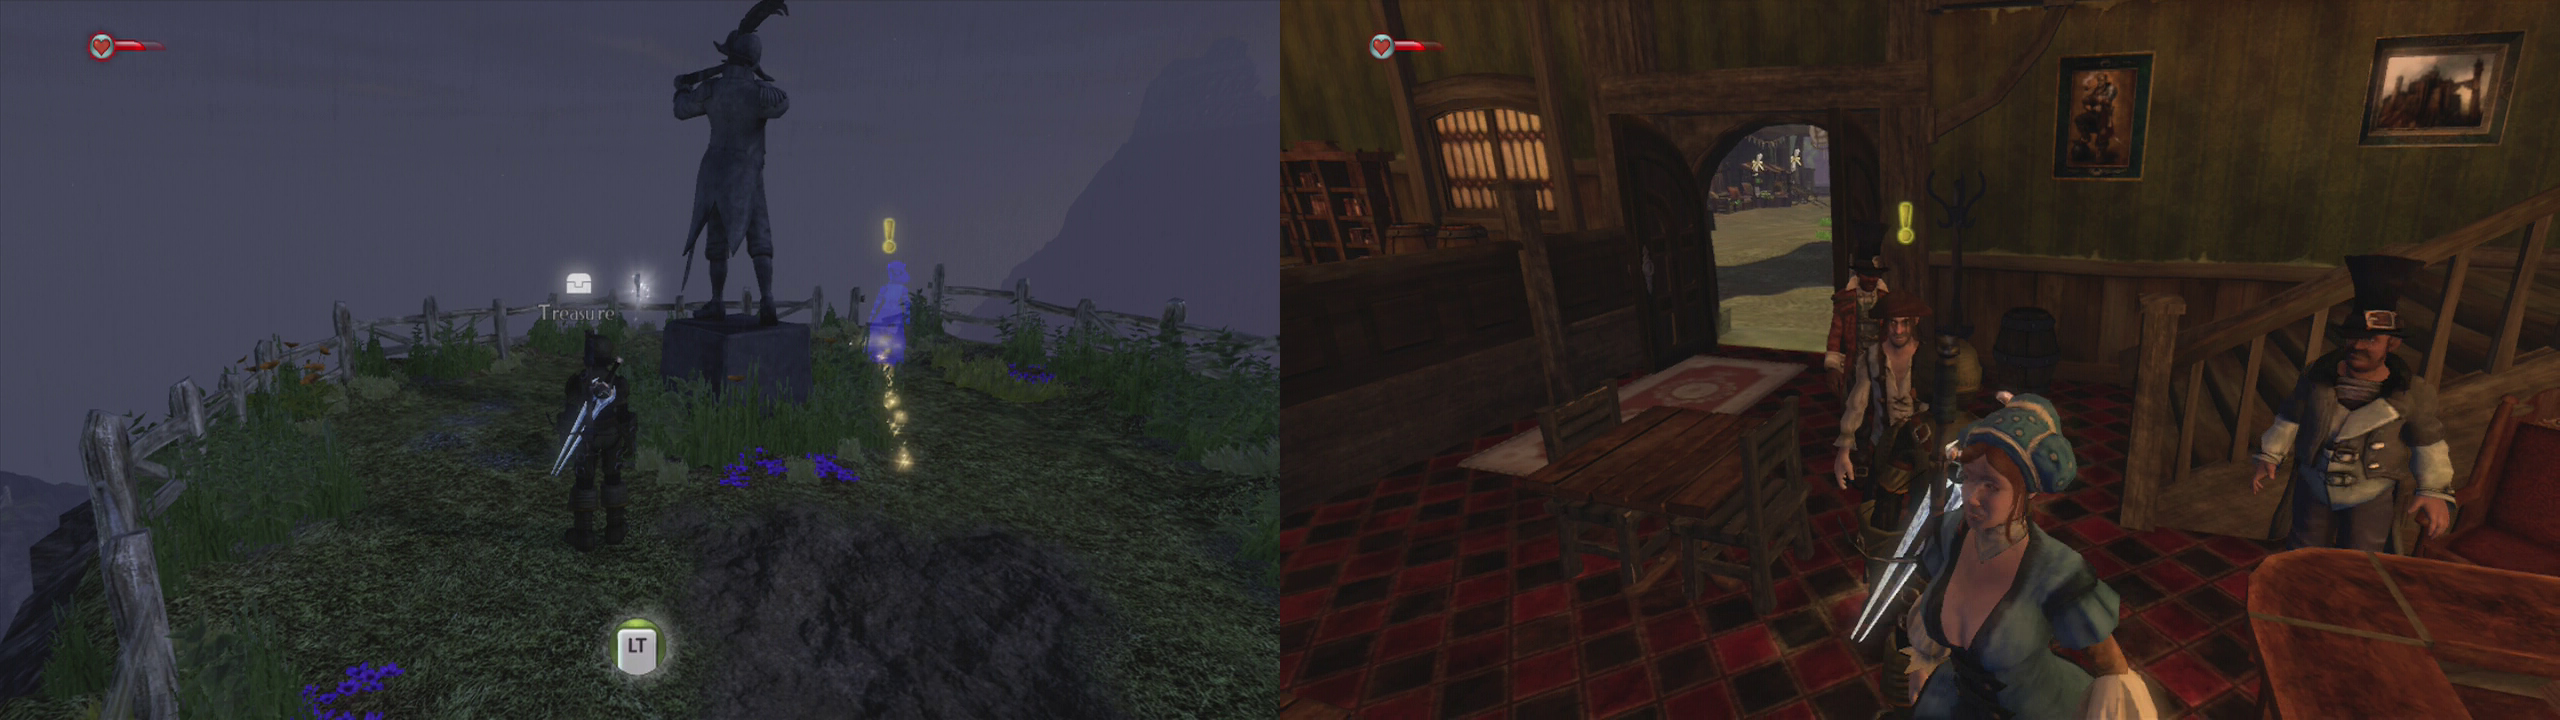 Pick up the quest from the ghost (and the key nearby) (left) and then head to Bowerstone to seduce your target (right).